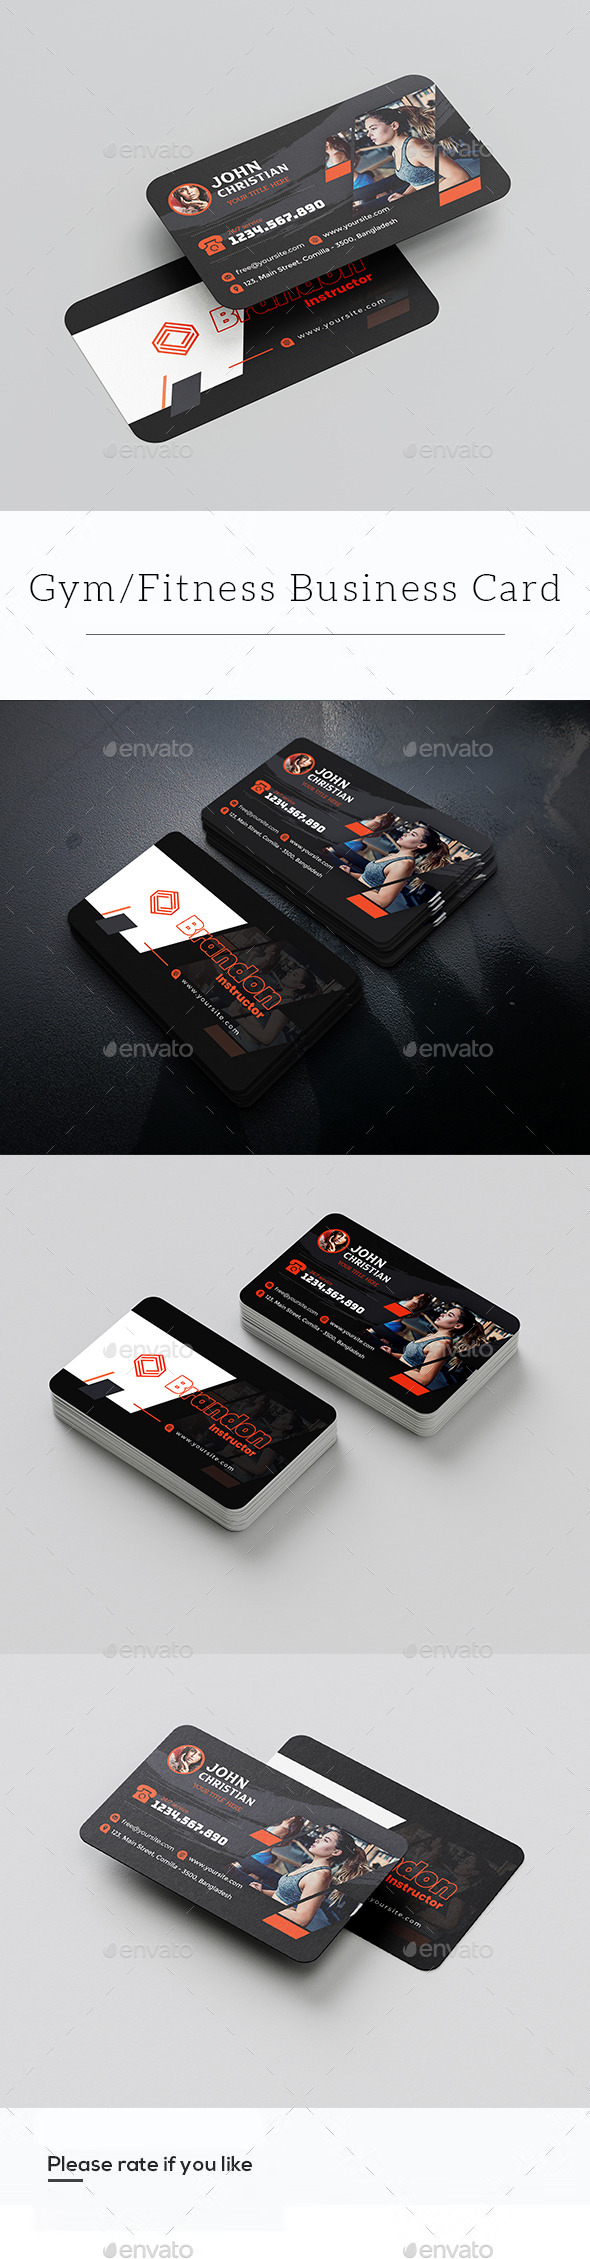 Fitness/Gym Business Card Vol - 2